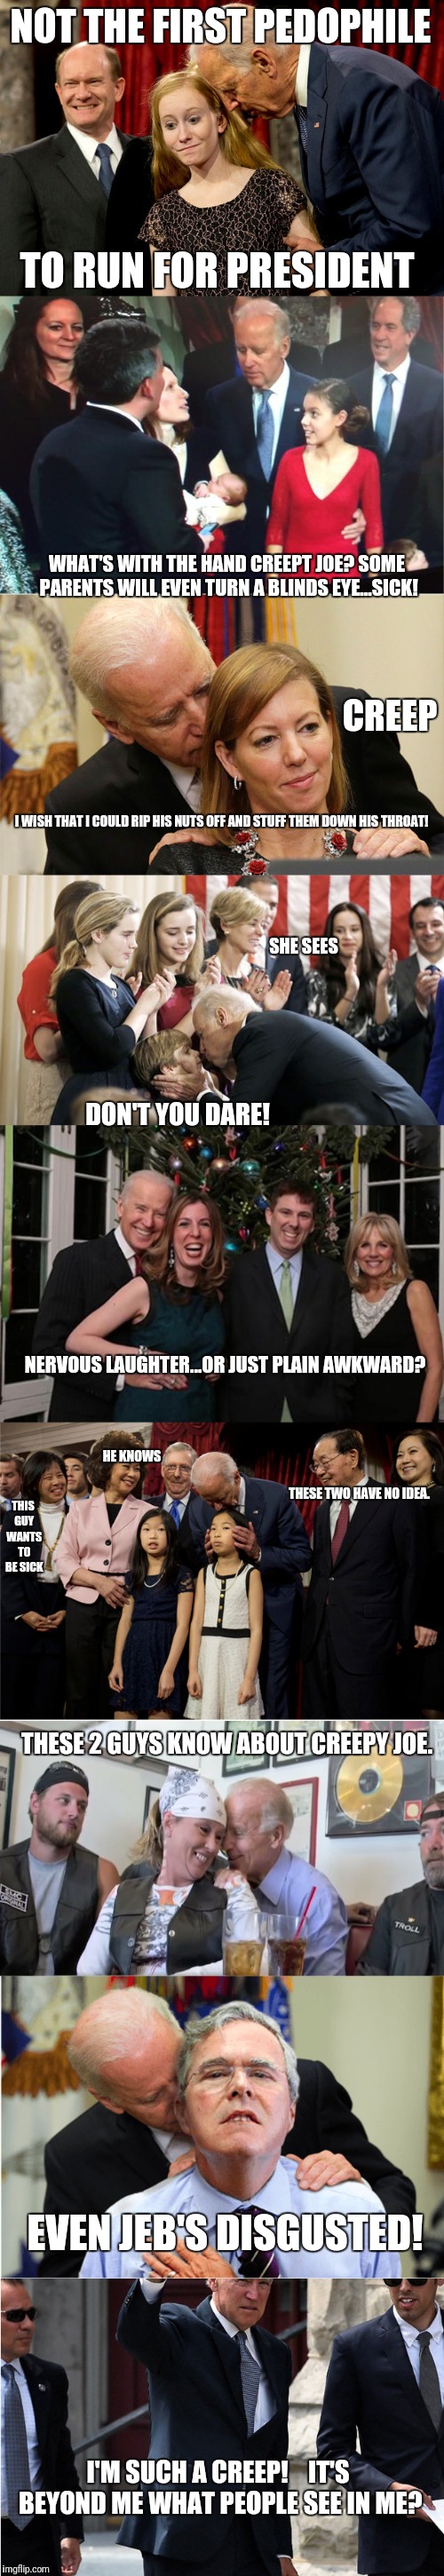 Creepy Joe....gets those dirty hands off our children! | NOT THE FIRST PEDOPHILE; TO RUN FOR PRESIDENT; WHAT'S WITH THE HAND CREEPT JOE? SOME PARENTS WILL EVEN TURN A BLINDS EYE...SICK! CREEP; I WISH THAT I COULD RIP HIS NUTS OFF AND STUFF THEM DOWN HIS THROAT! SHE SEES; DON'T YOU DARE! NERVOUS LAUGHTER...OR JUST PLAIN AWKWARD? HE KNOWS; THESE TWO HAVE NO IDEA. THIS GUY WANTS TO BE SICK; THESE 2 GUYS KNOW ABOUT CREEPY JOE. EVEN JEB'S DISGUSTED! I'M SUCH A CREEP!    IT'S BEYOND ME WHAT PEOPLE SEE IN ME? | image tagged in joe biden pervert disgusted with trump,pedo joe,joe biden,pedophile,inappropriate | made w/ Imgflip meme maker